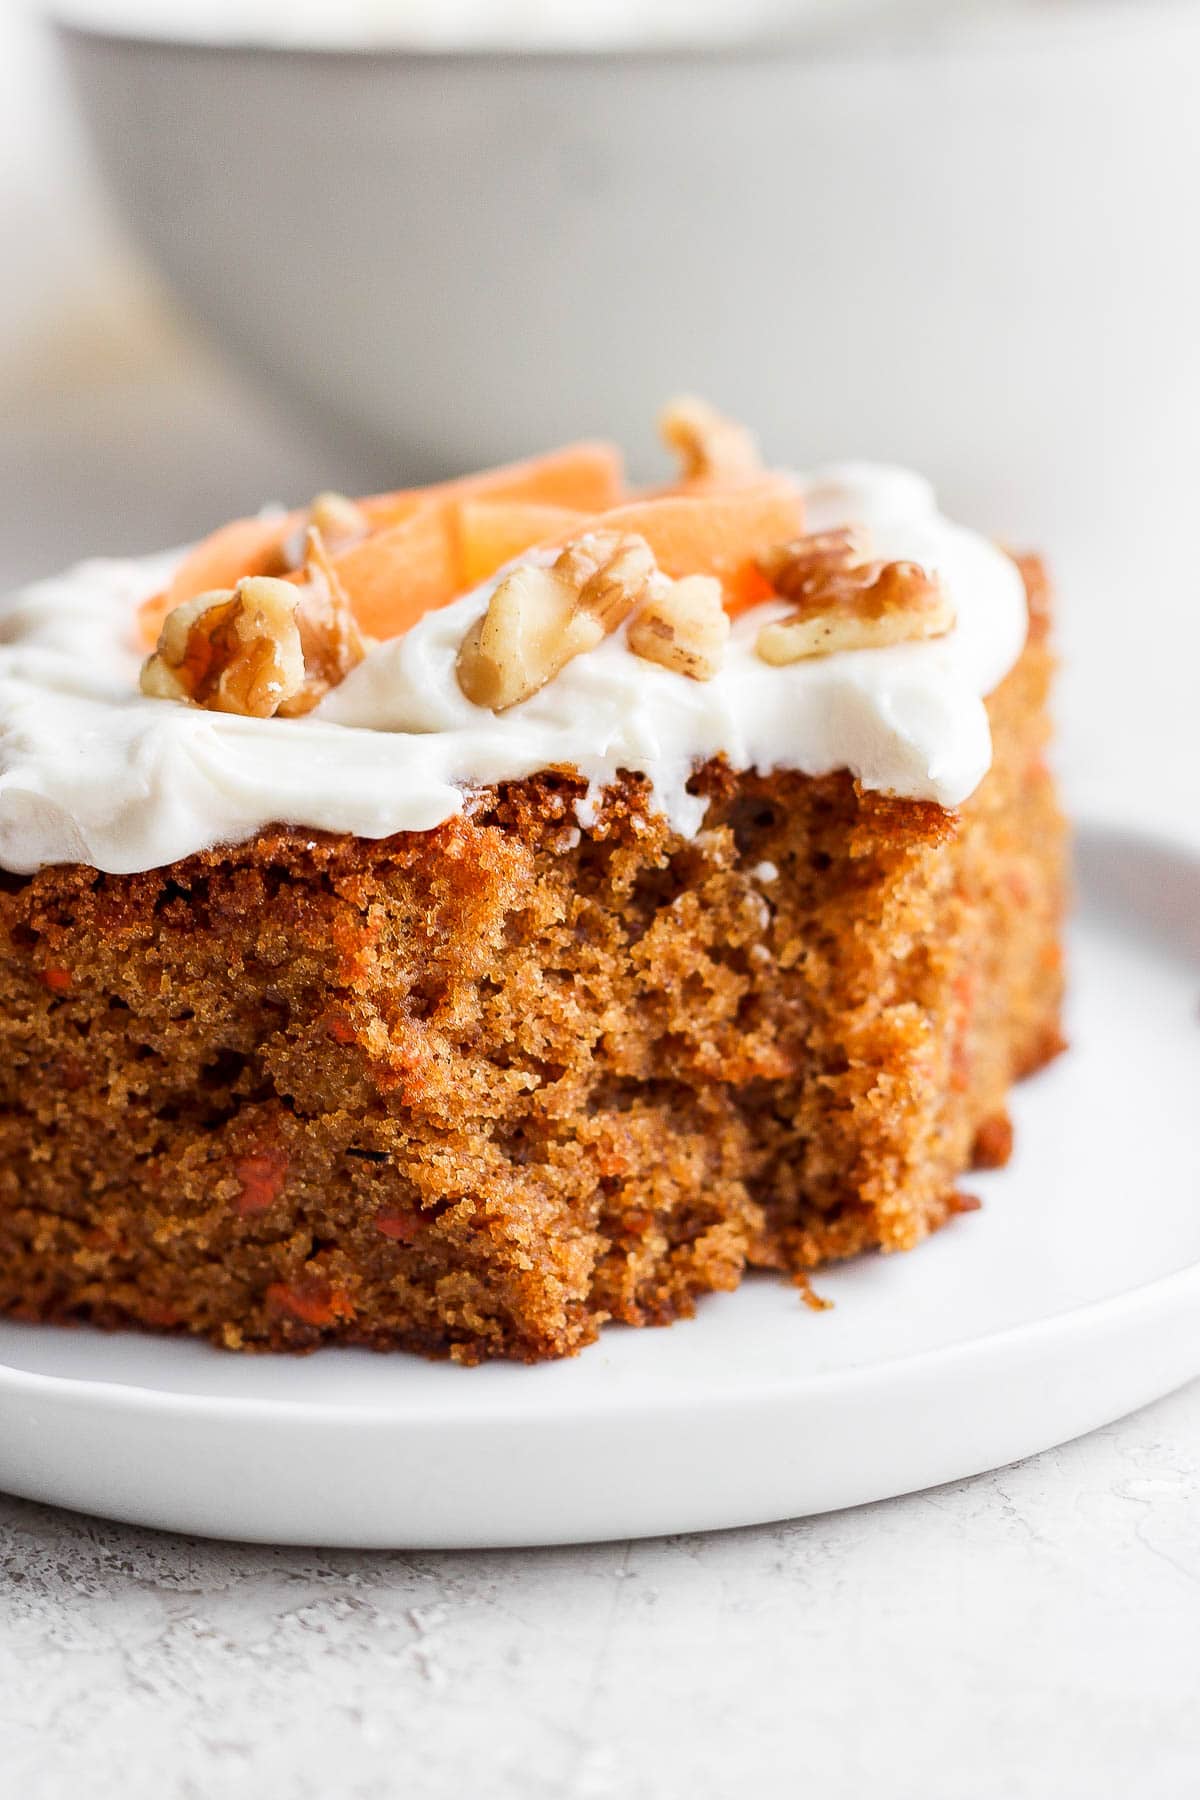 Slice of gluten free carrot cake with a bite out of it.